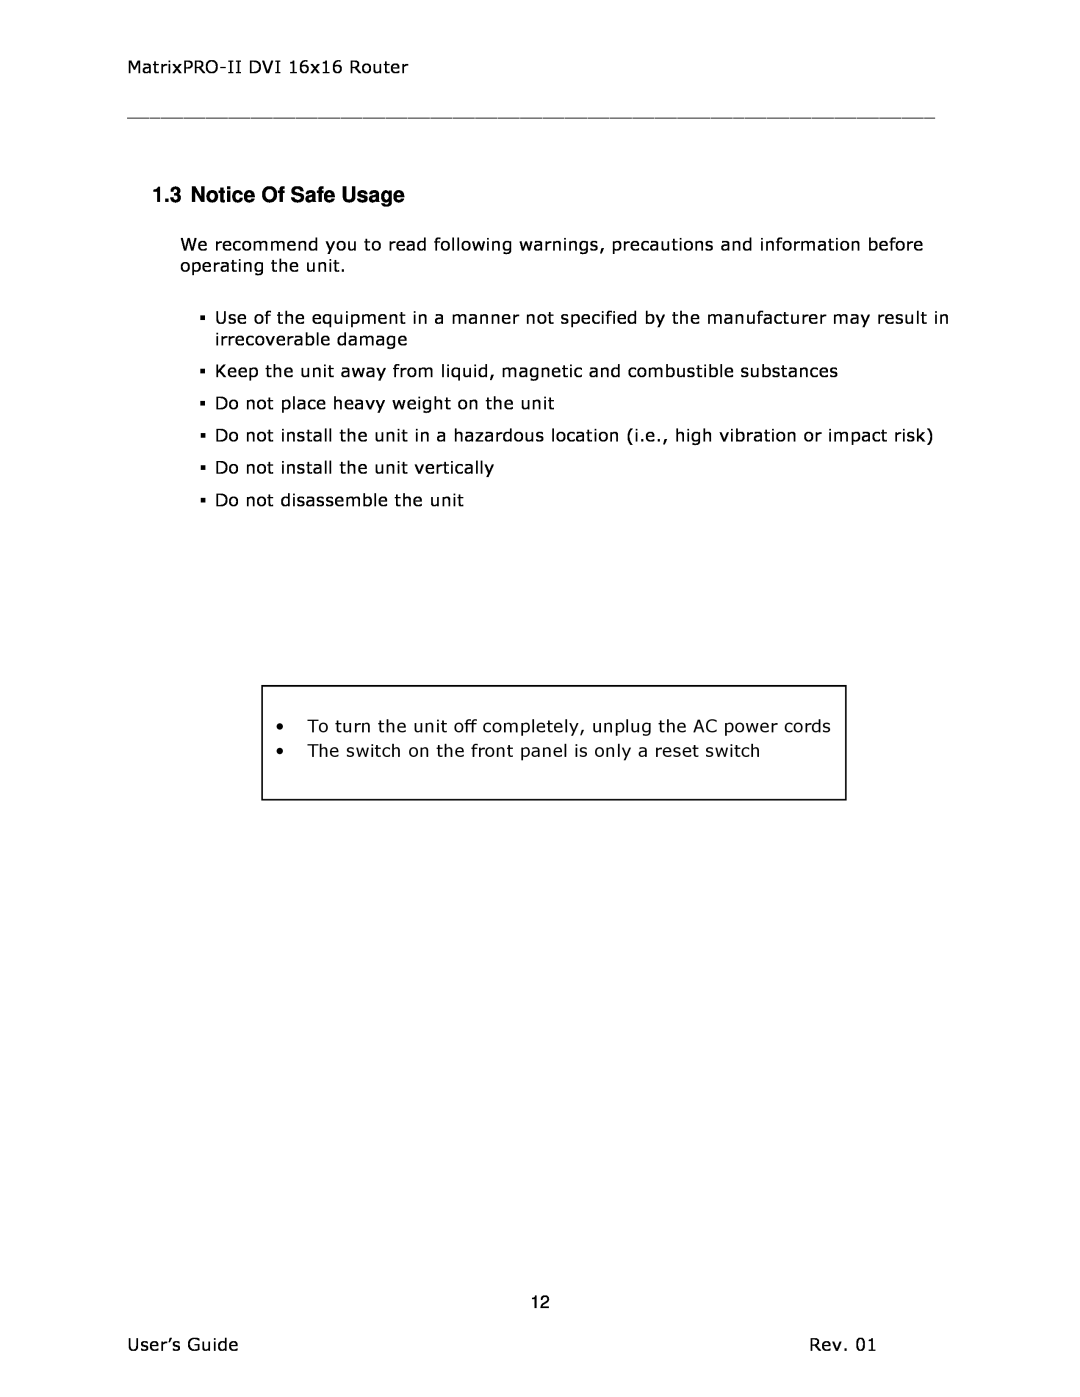 Barco 26-1302001-00 manual Notice Of Safe Usage 